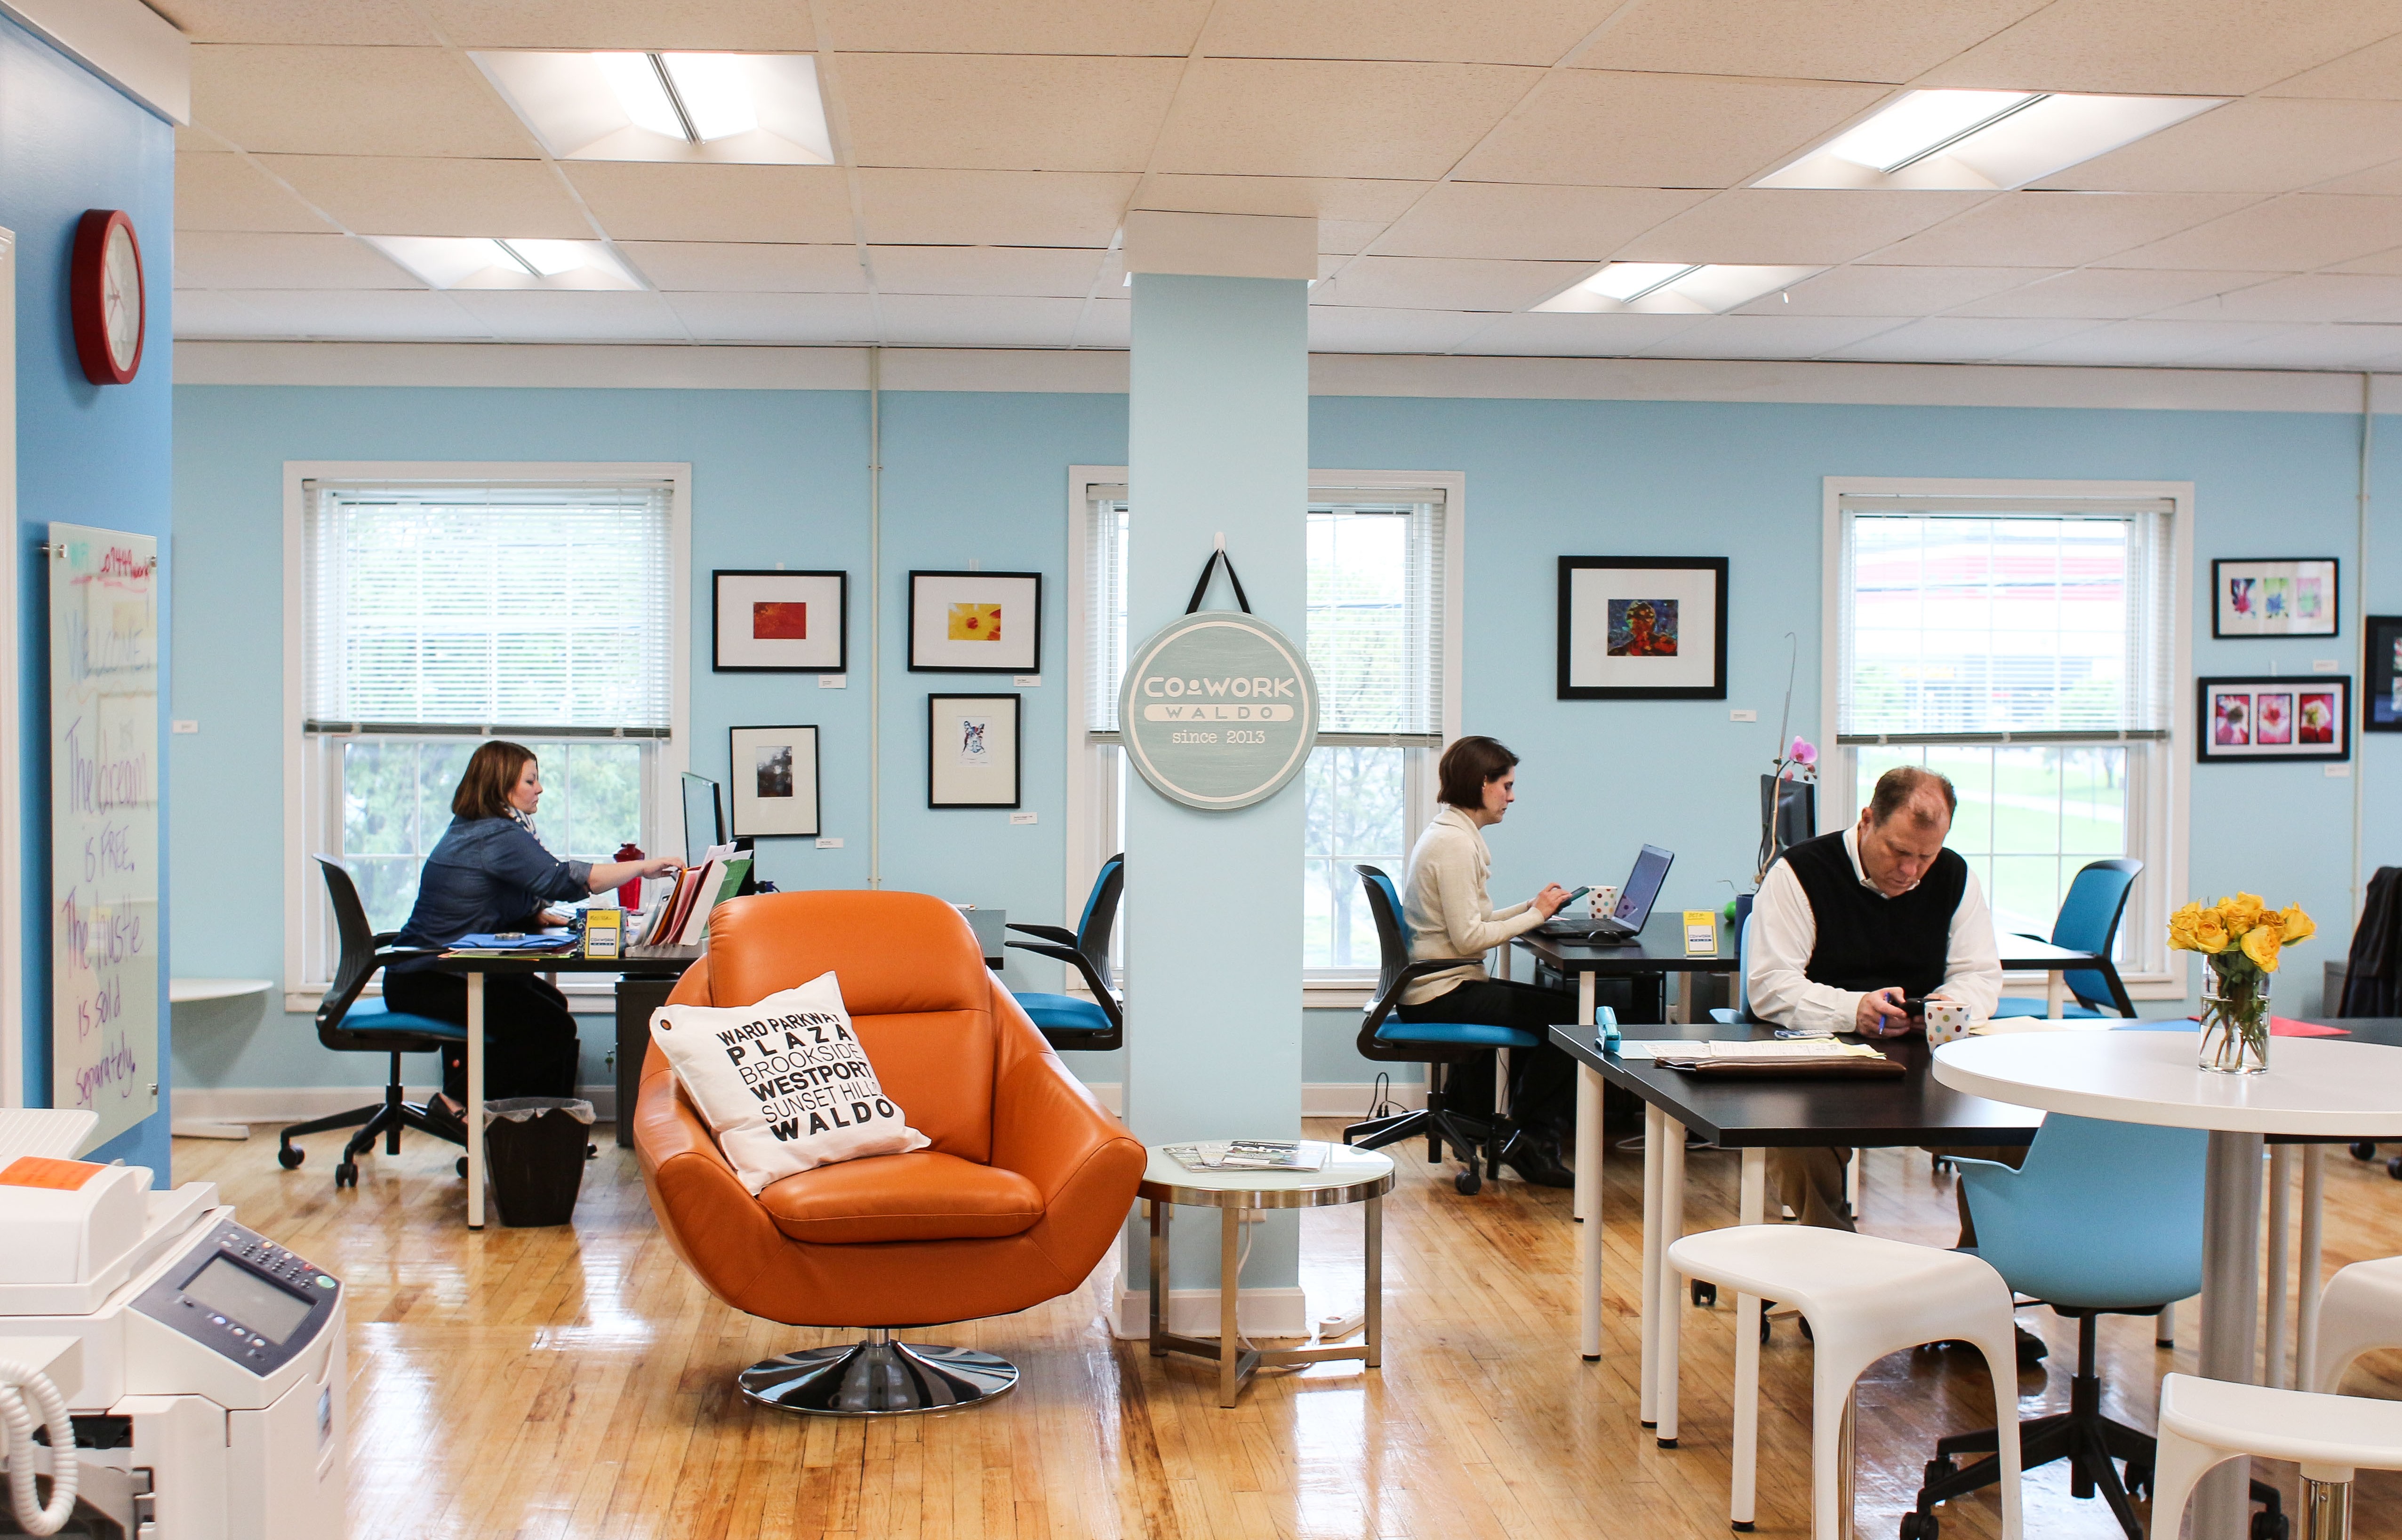 Shaping the sharing economy: Women in coworking